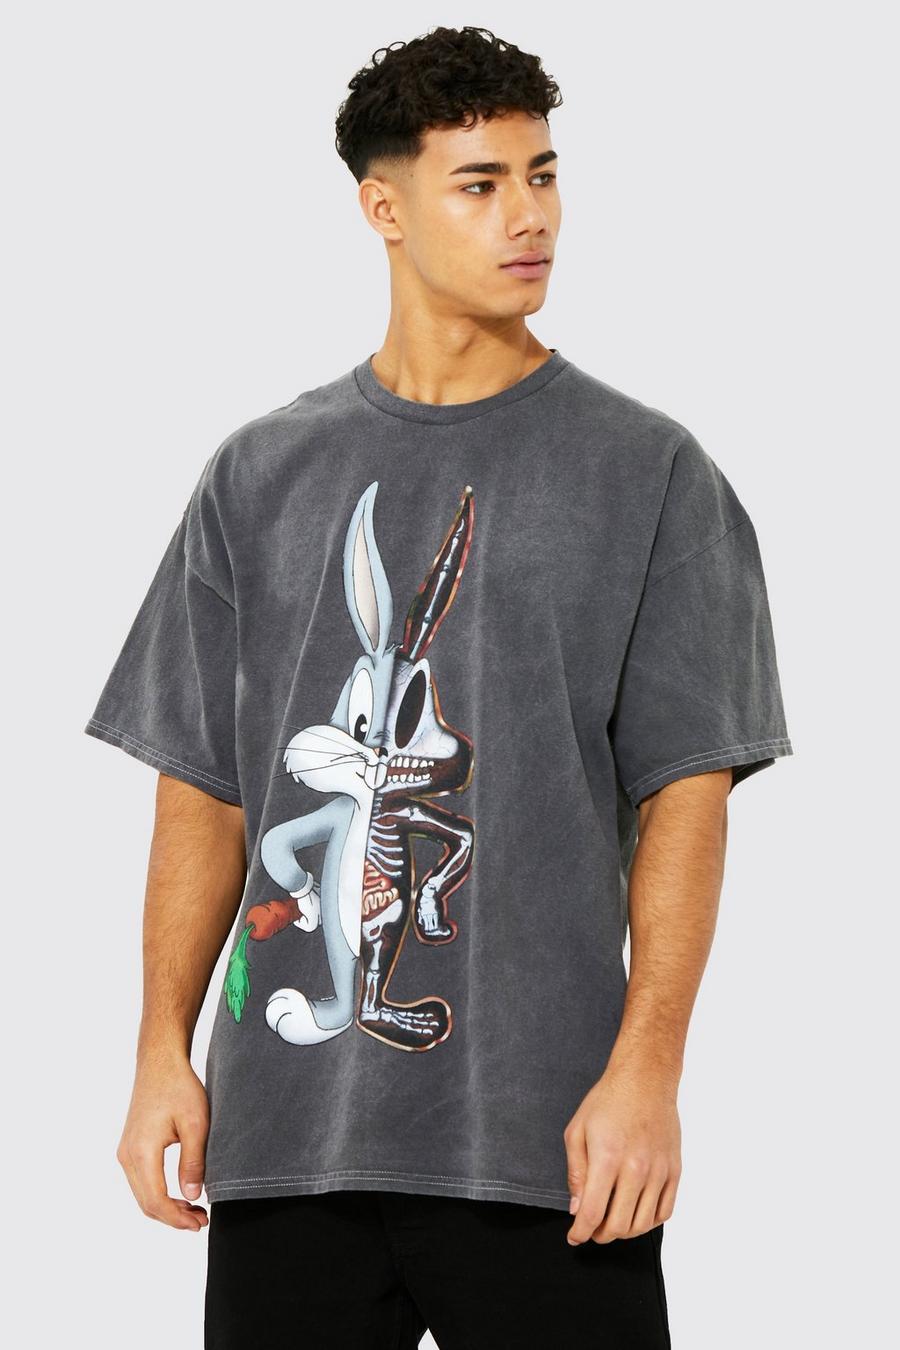 Charcoal Bugs Bunny Oversize t-shirt image number 1